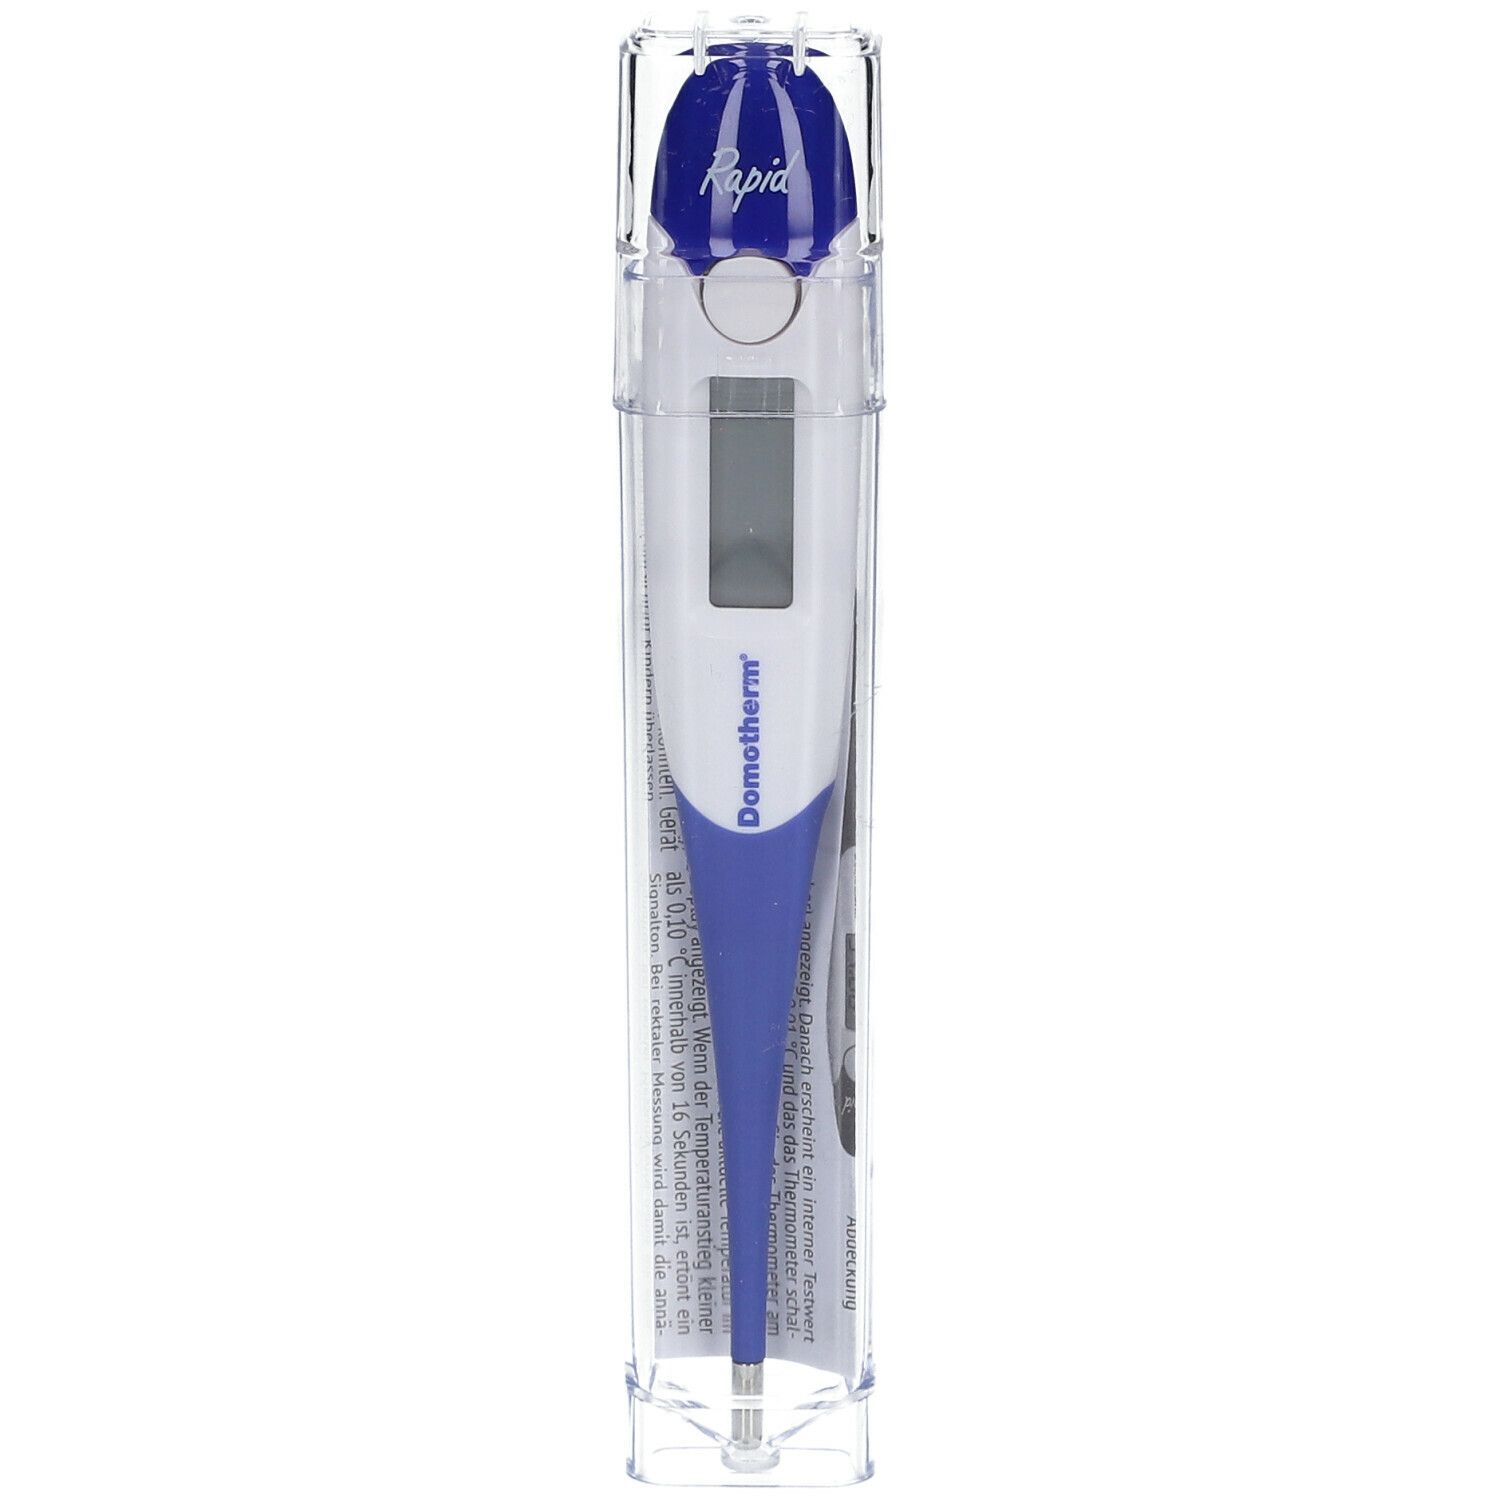 Domotherm® Rapid Digitalthermometer